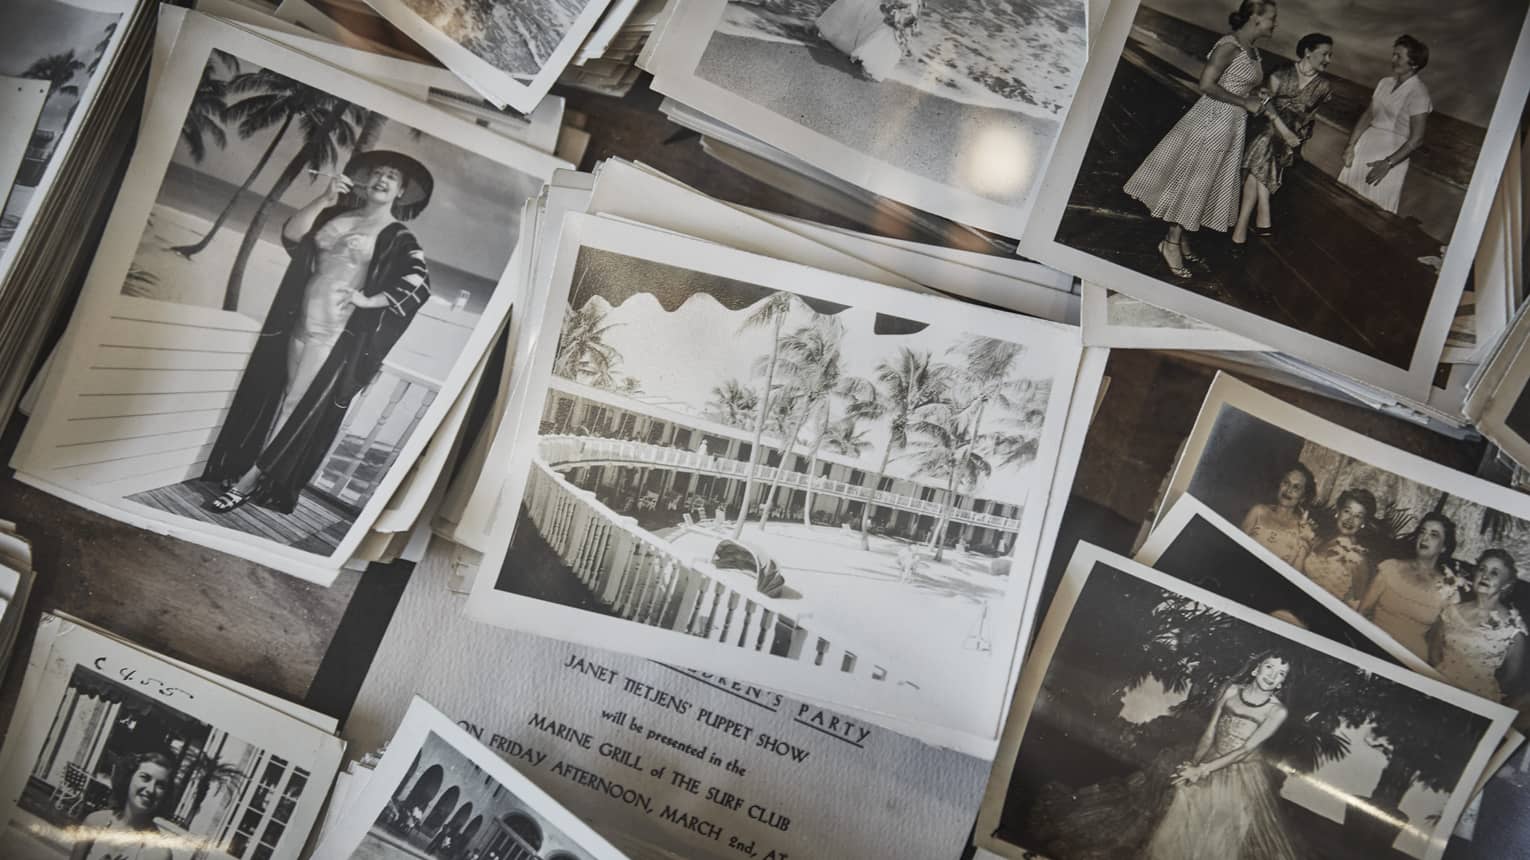 Breakfast with a Historian. Stacks of black-and-white photos show former guests and historic resort